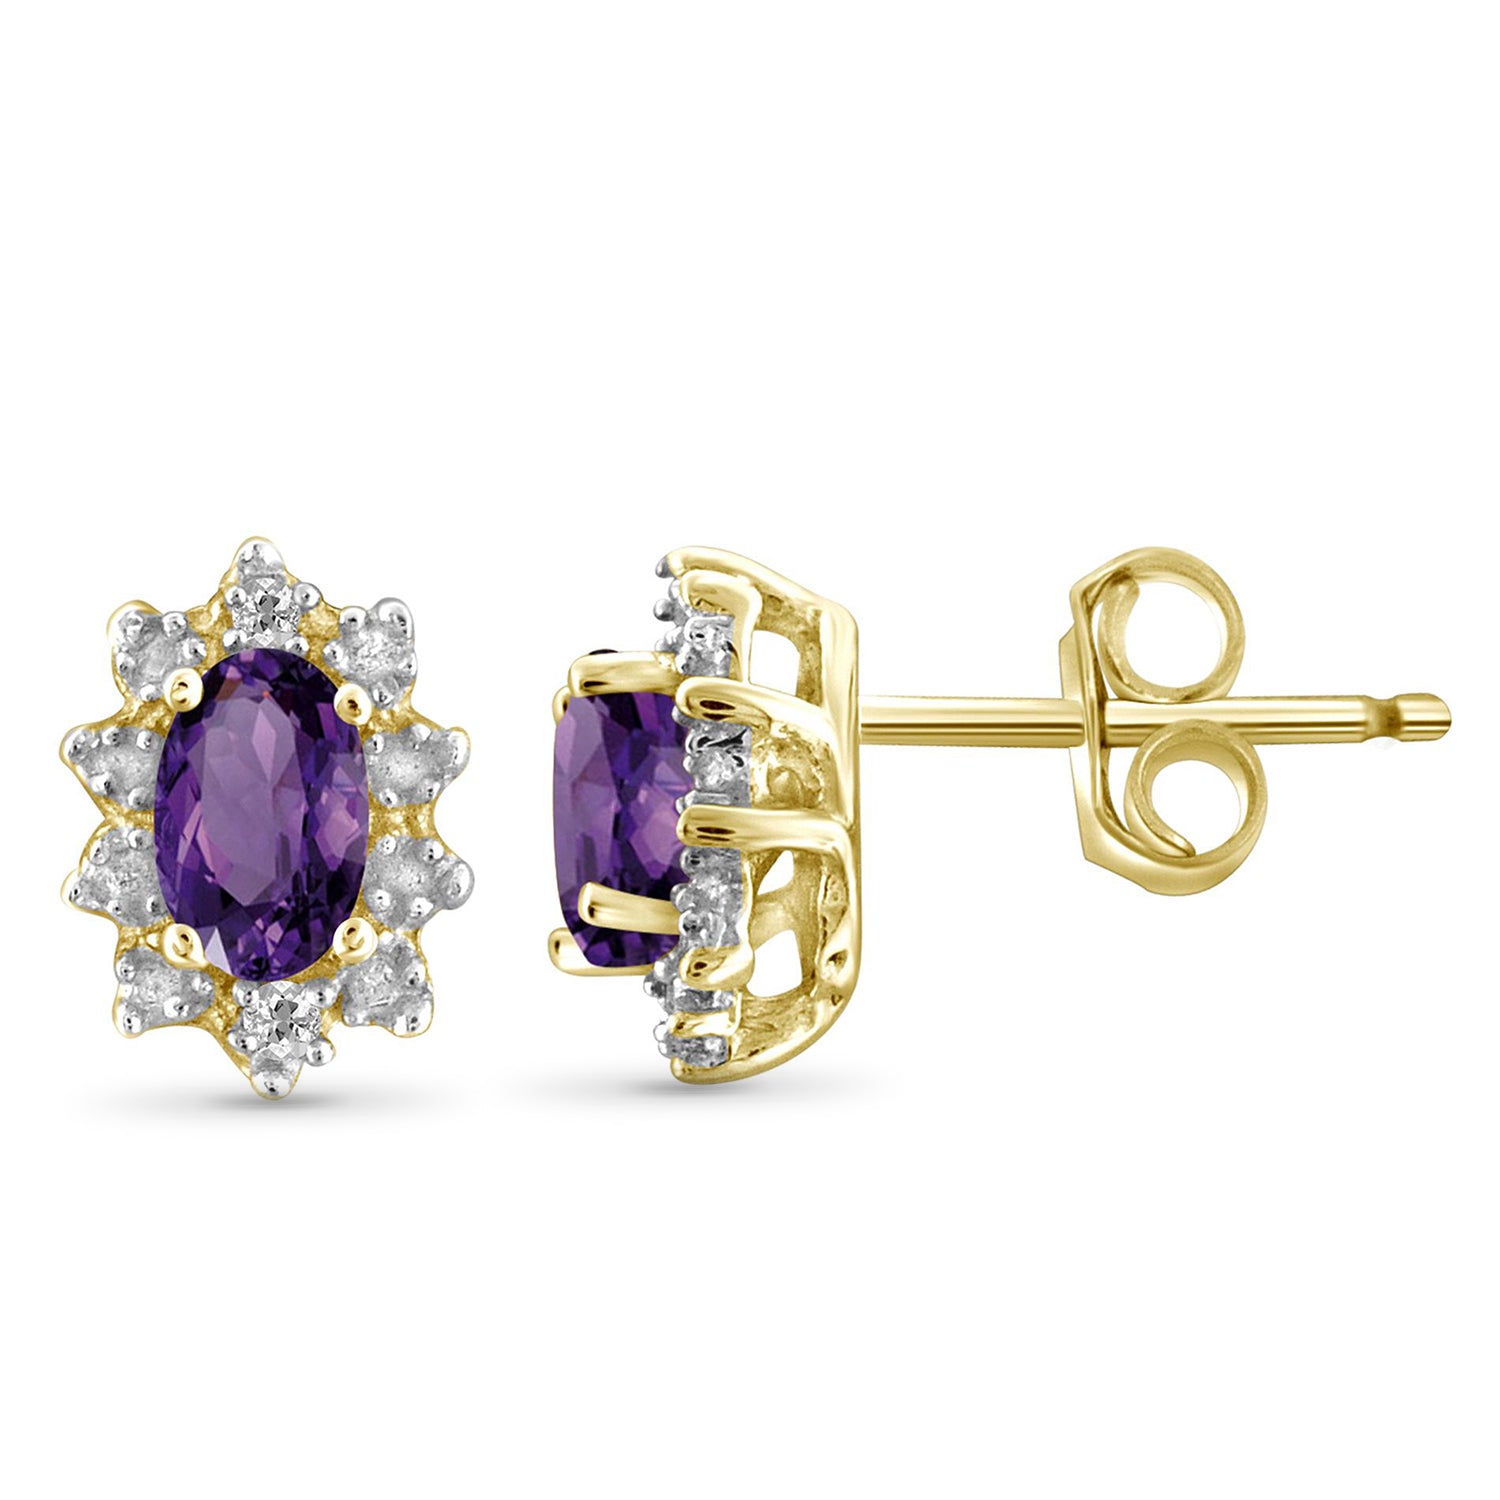 0.58 Carat T.G.W. Amethyst Gemstone and White Diamond Accent 14K Gold-Plated Earrings